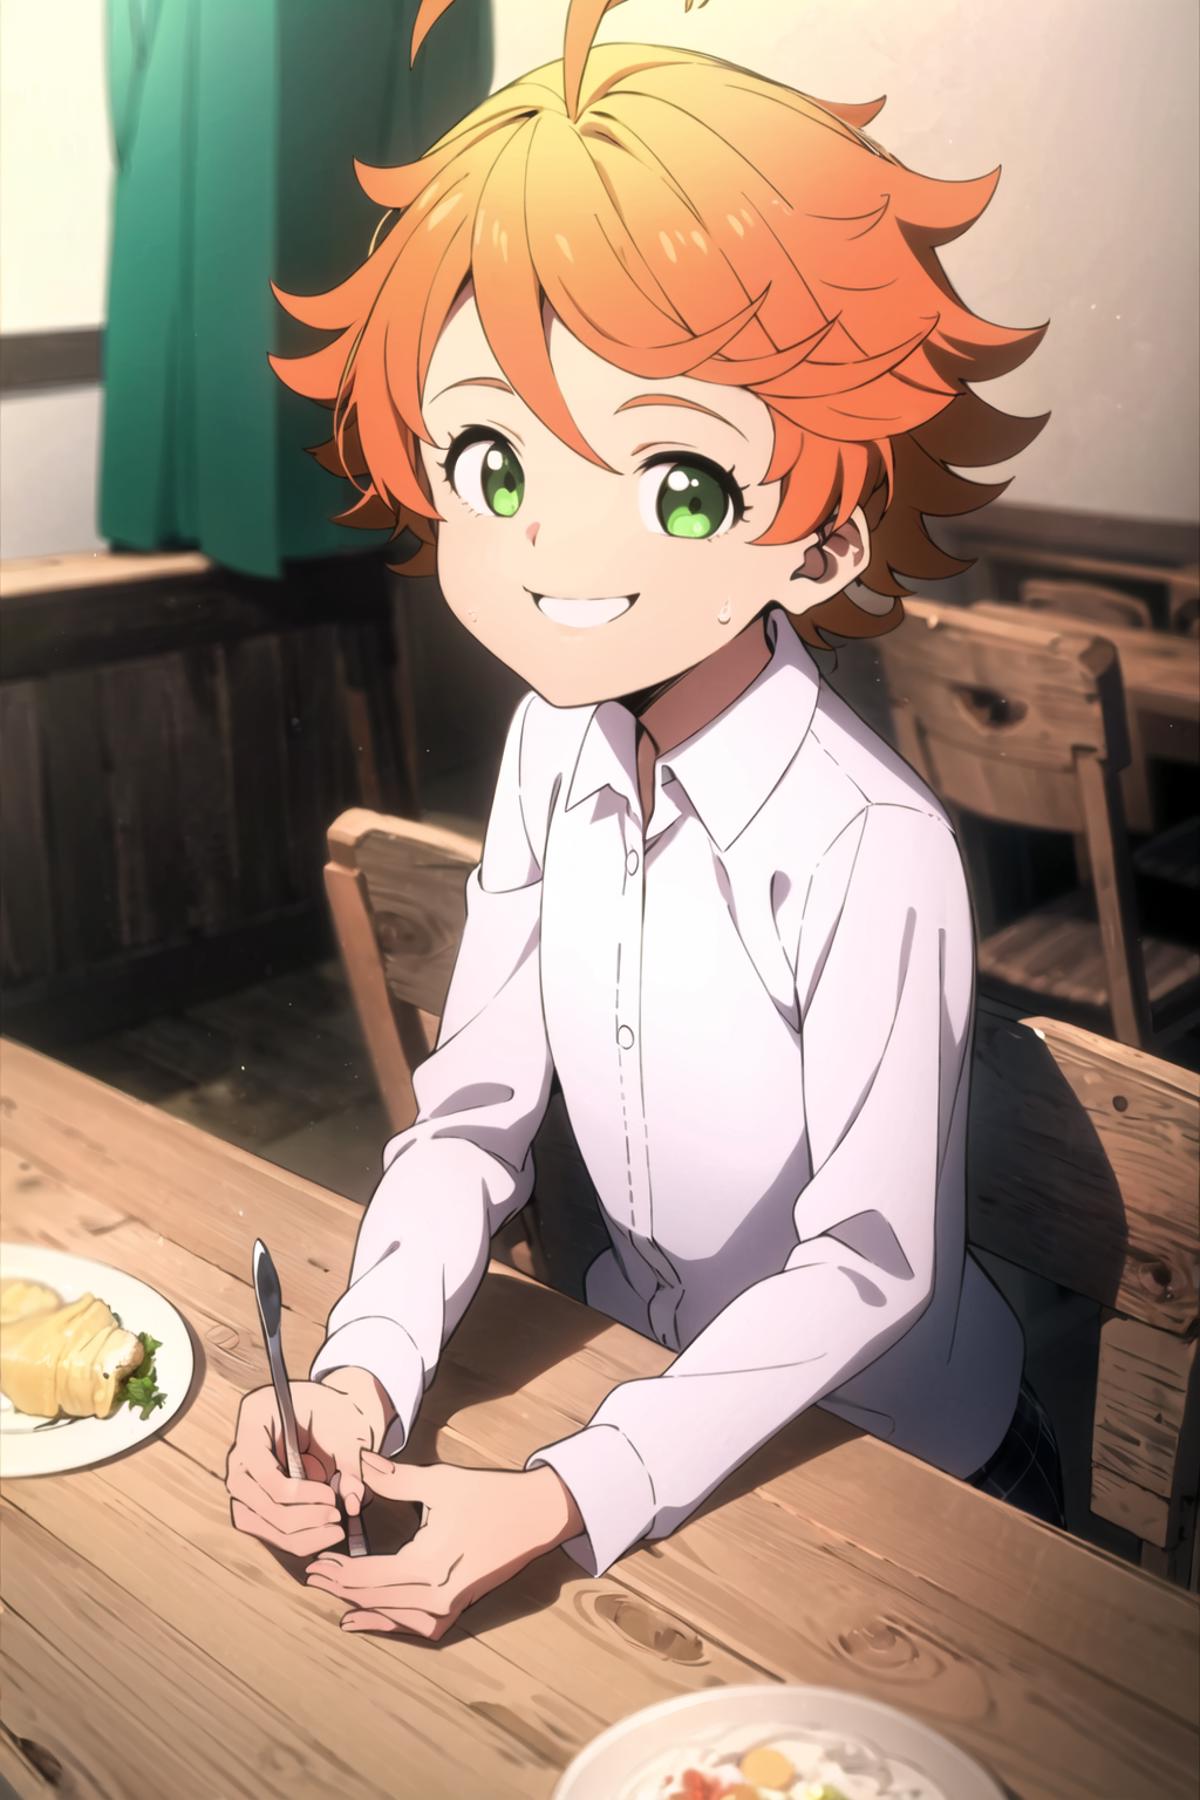 Emma (The Promised Neverland) image by Maximax67